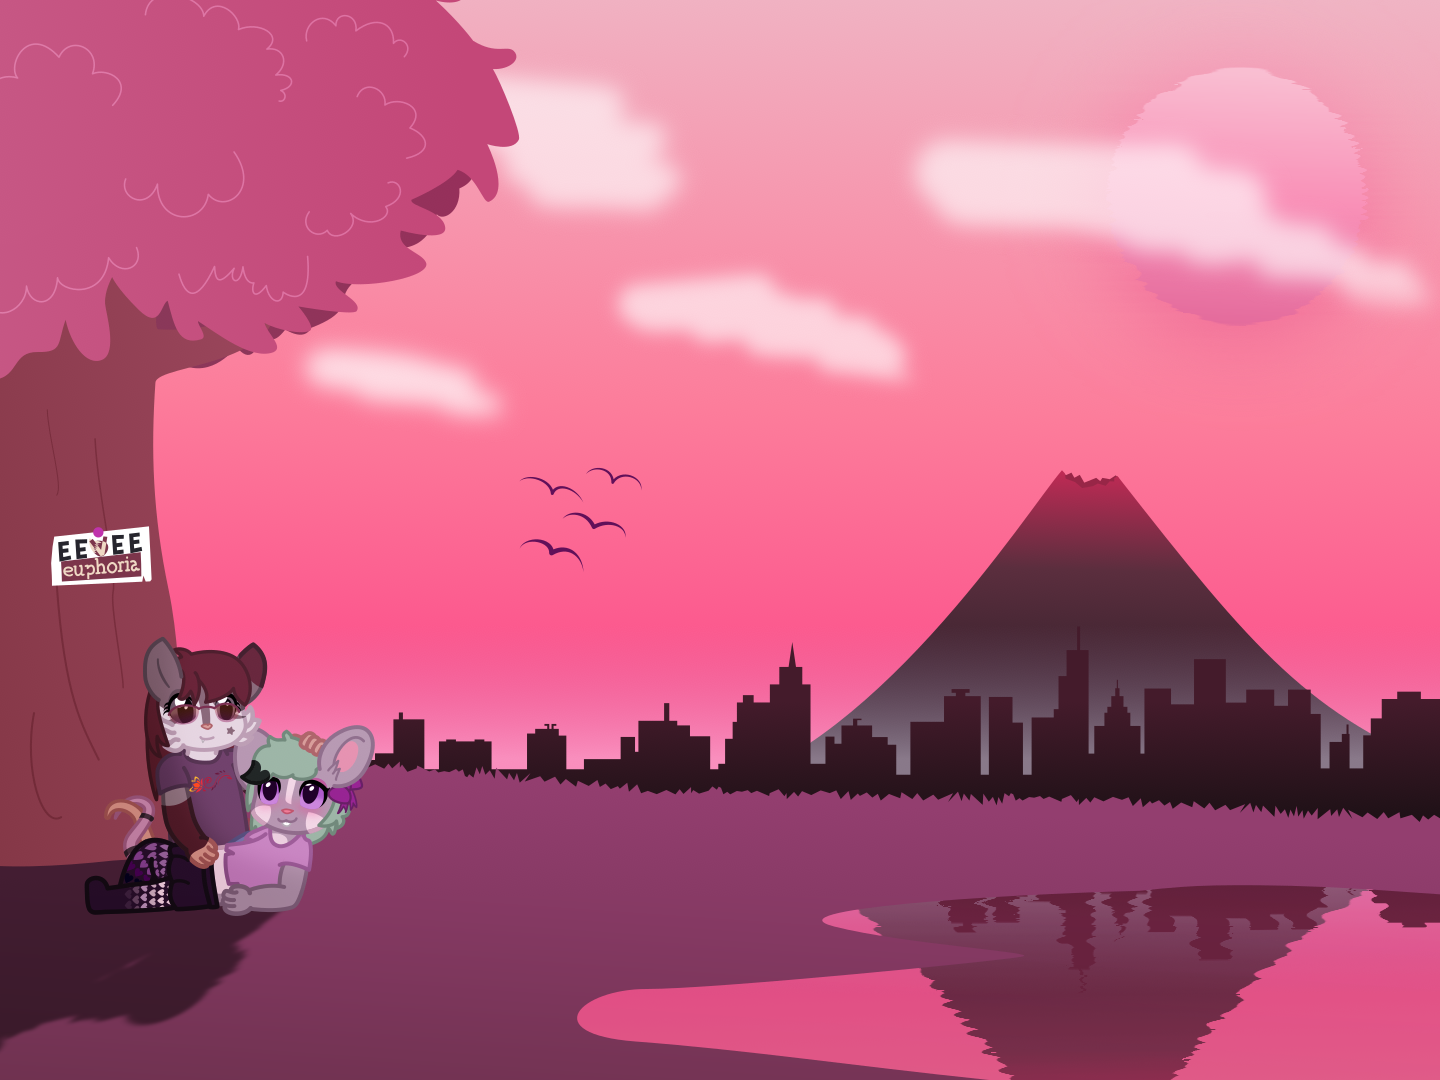 an anthro possum and an anthro mouse are sitting underneath a tree, with the possum holding and petting the mouse. the background is very pink and purple, with the grass being purple, and the sky being pink. in the distance there is a city, and behind that city is a volcano. there is a reflection of that that goes into a nearby pond.